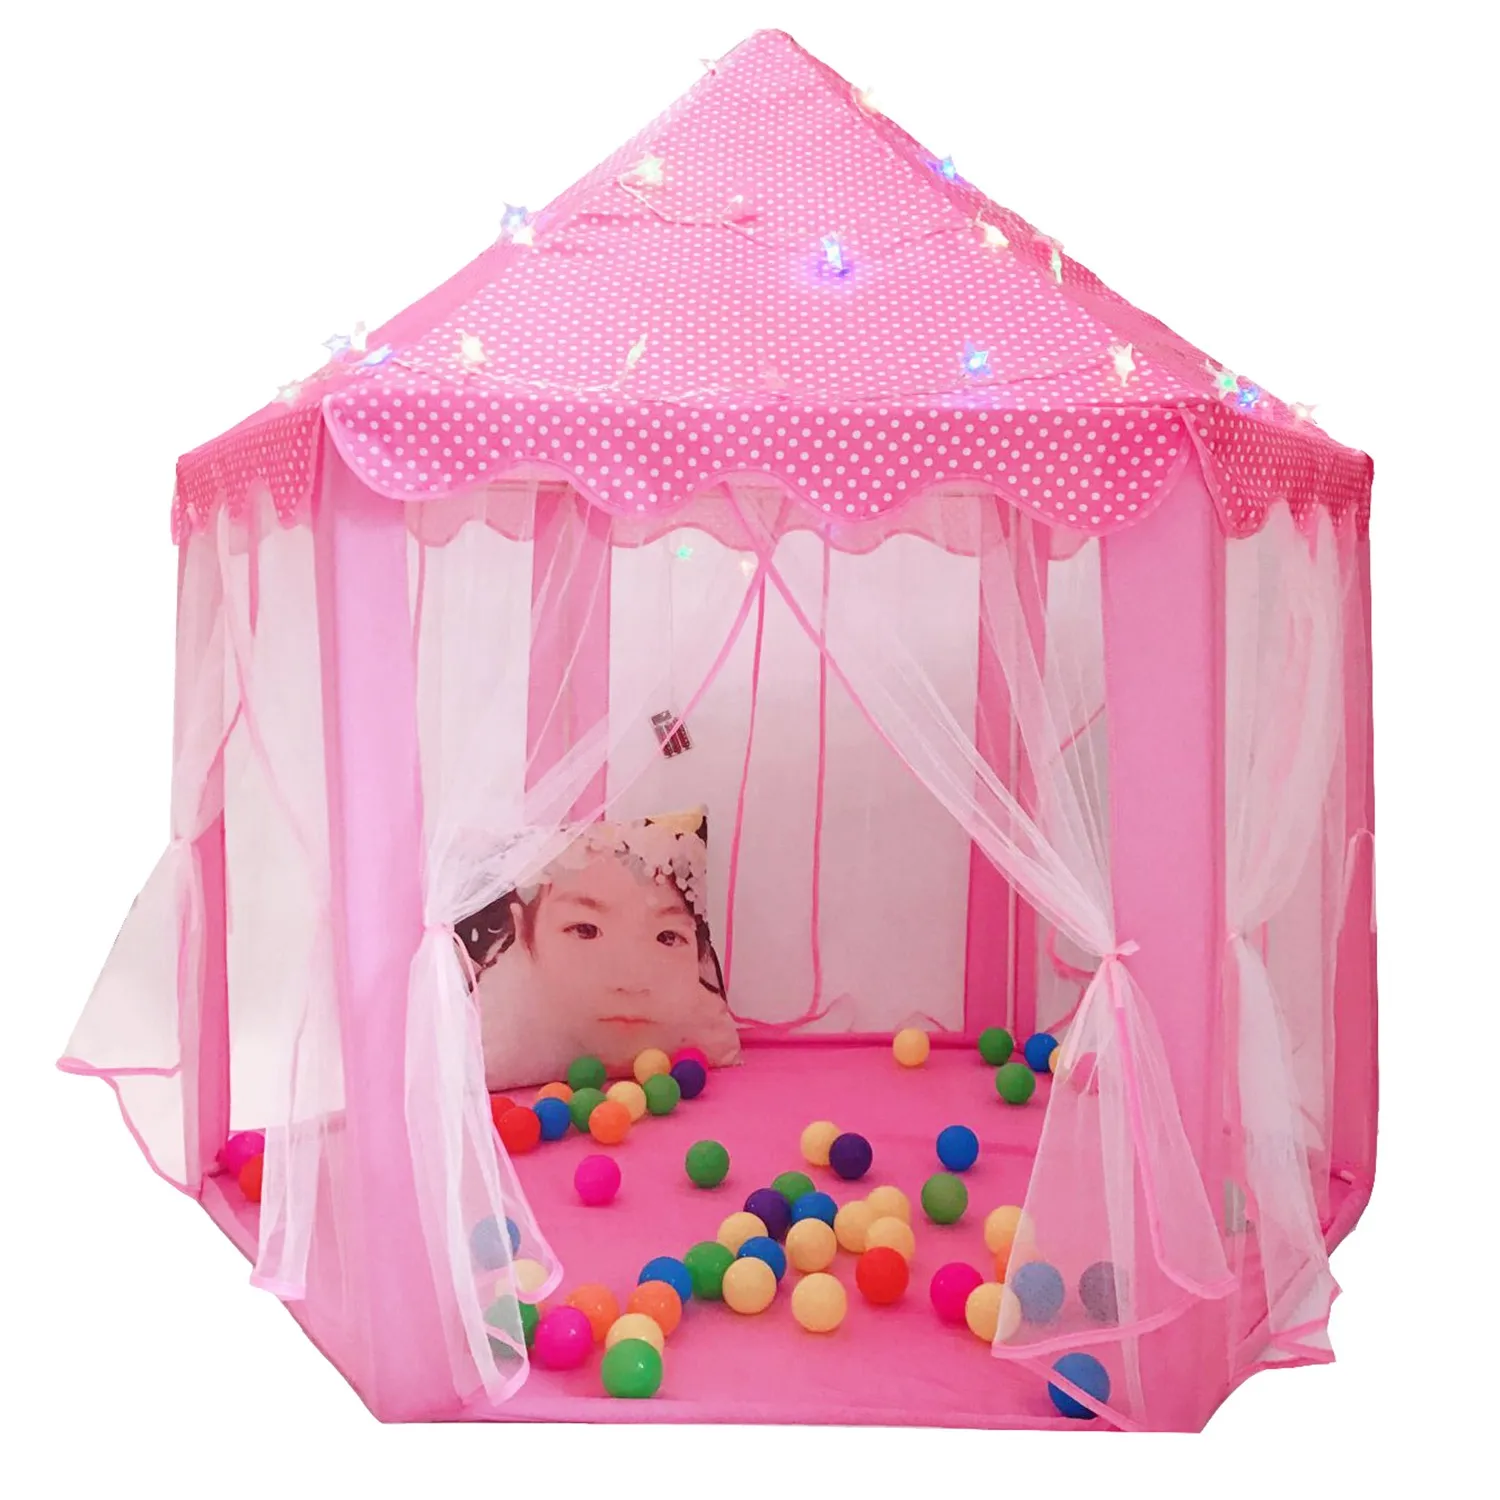 Pink Boys Sumerice Kids Play Tent Large Indoor & Outdoor Hexagon Princess Castle Tent Fairy Playhouse for Girls Children 